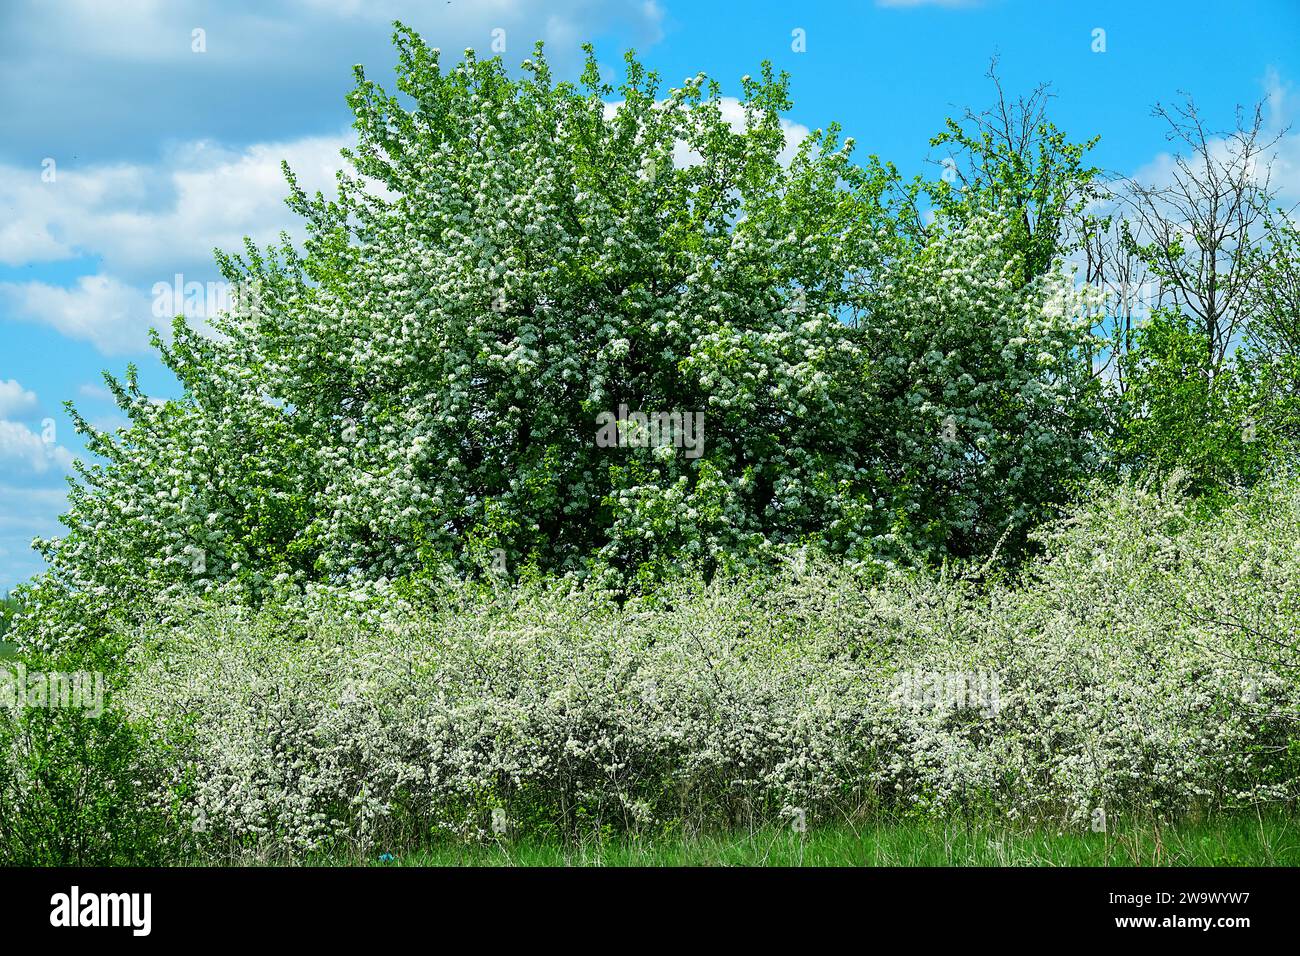 Blackthorn (Prunus spinosa) thornbush. Blooming wild apple tree in the background. Plot of forest-steppe, blooming wild fruit trees. Type of biocenosi Stock Photo